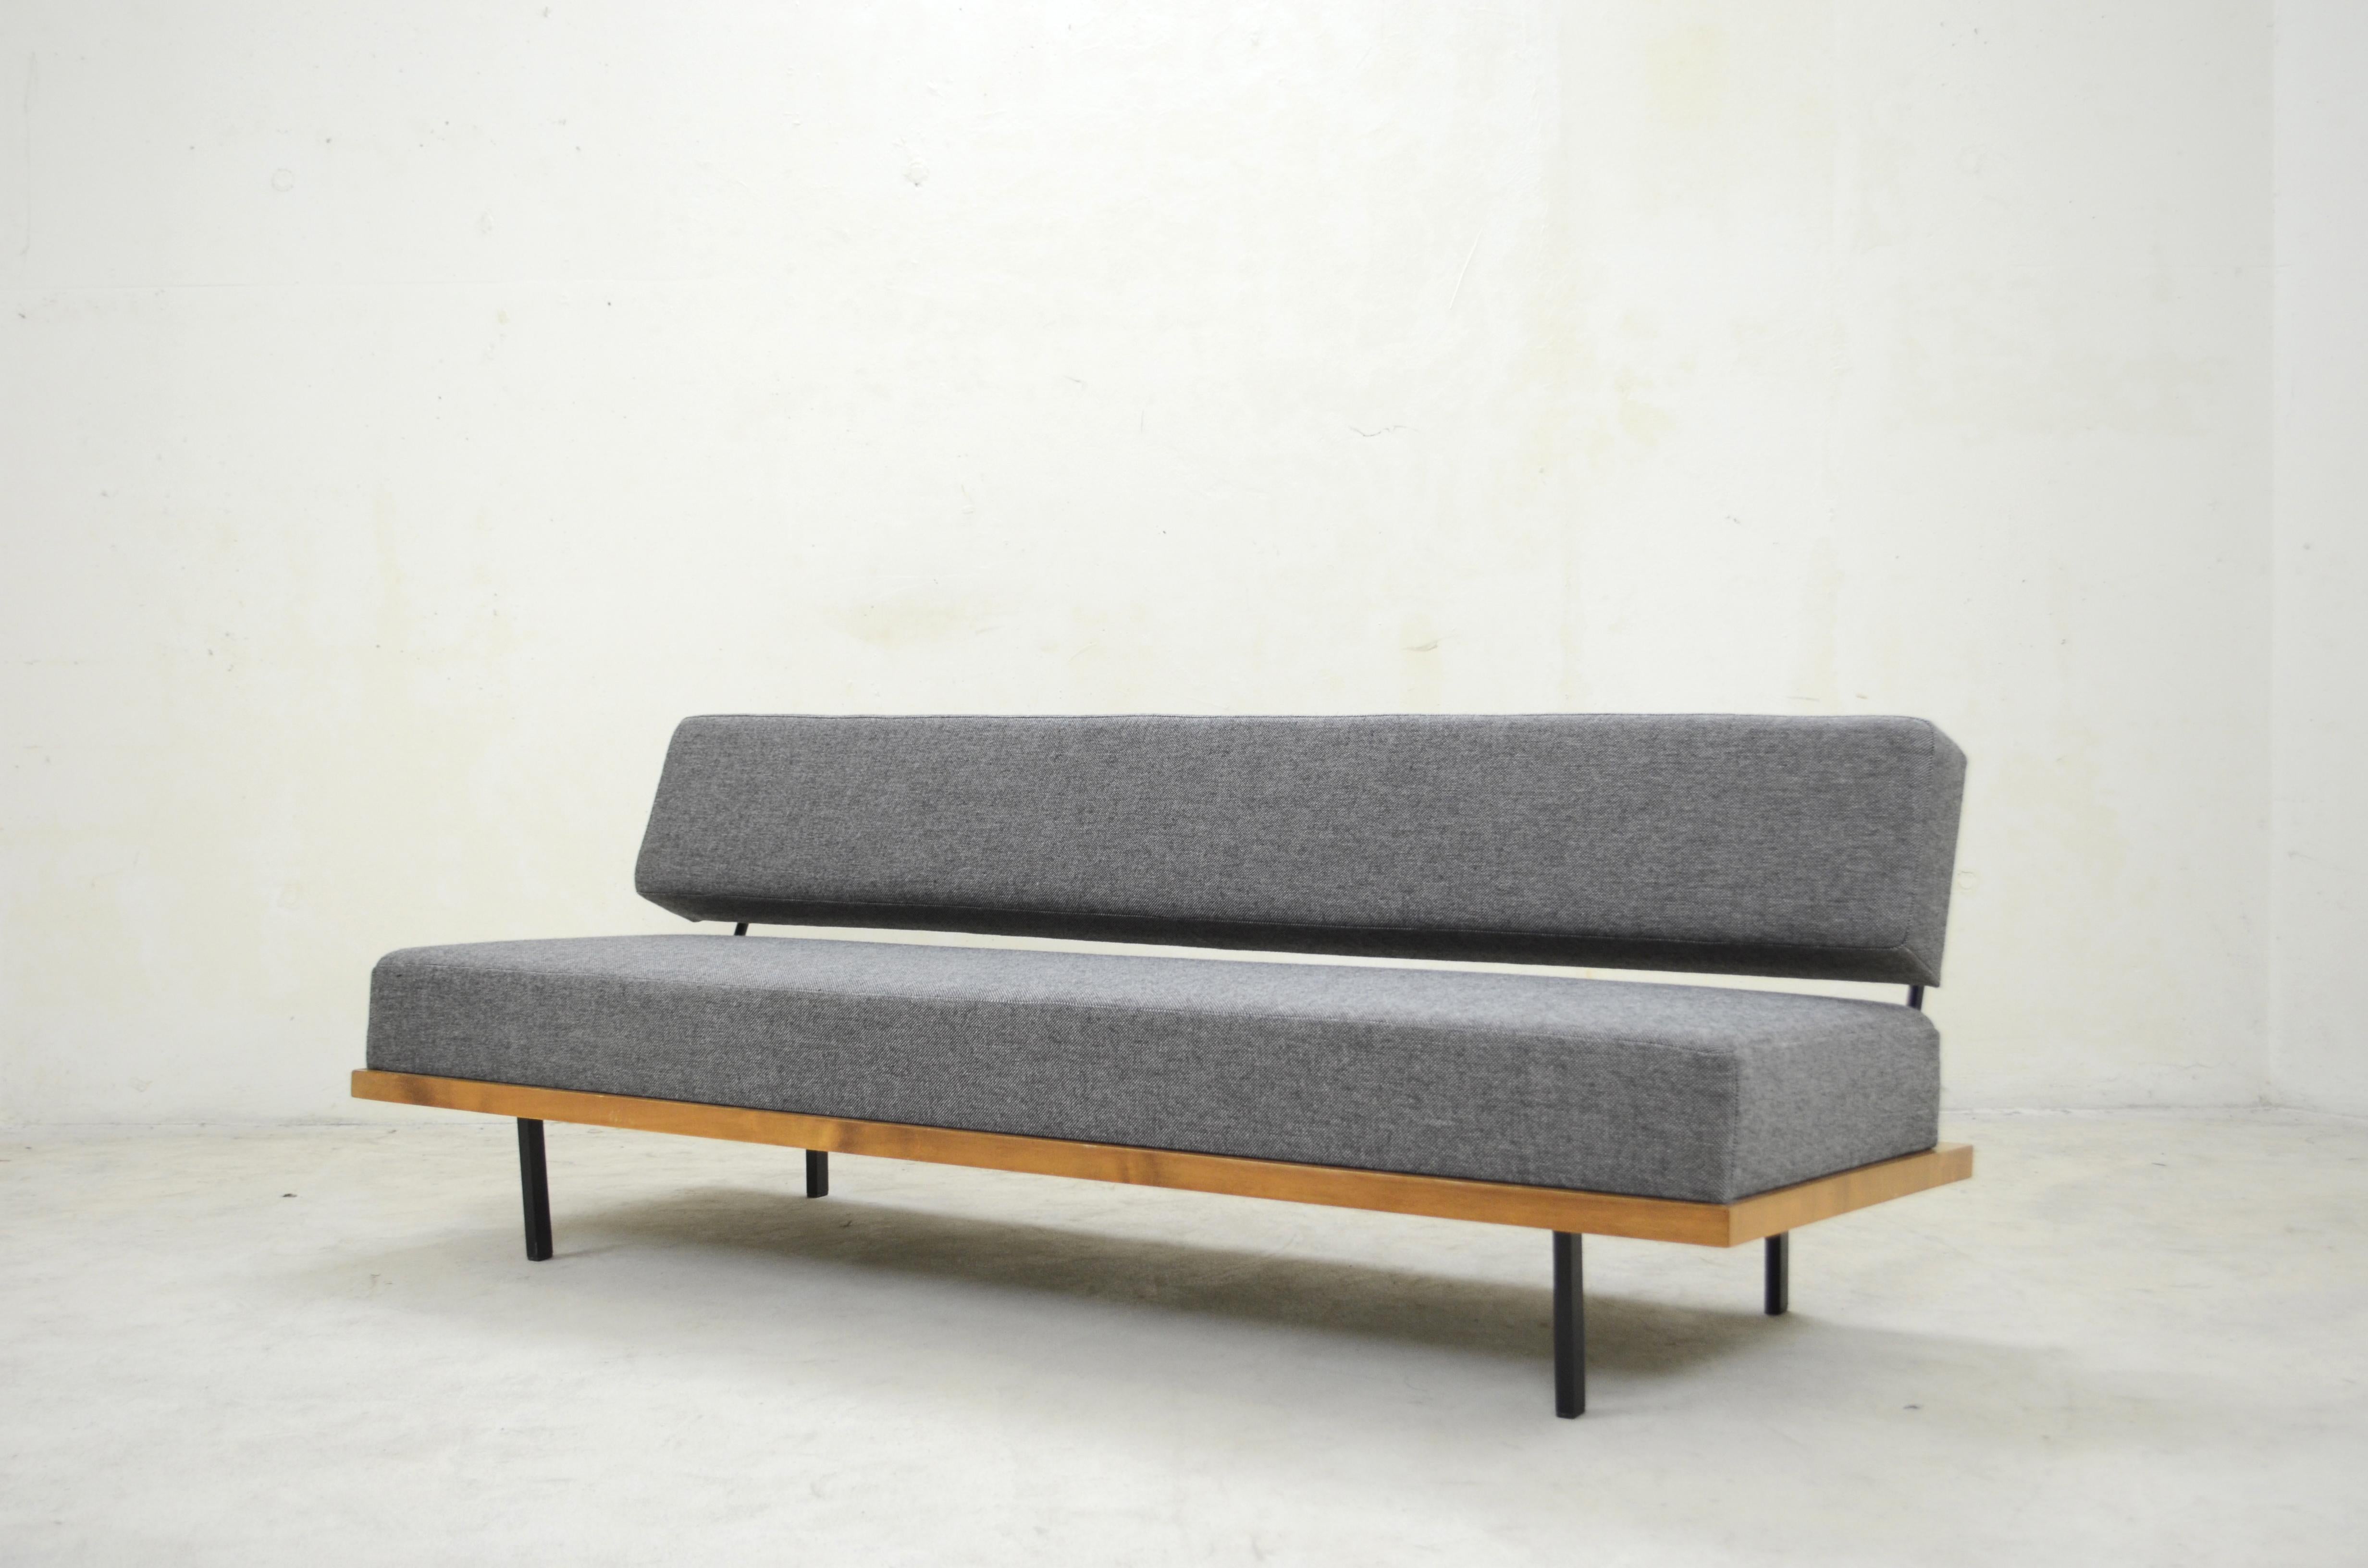 Hans Kaufeld manufactures this daybed sofa. Design by Josef Pentenrieder in the year 1954.
It has a convertible backrest for using as an daybed.
A simply and classic daybed from the midcentury.
It was upholstered and the fabric is renewed in